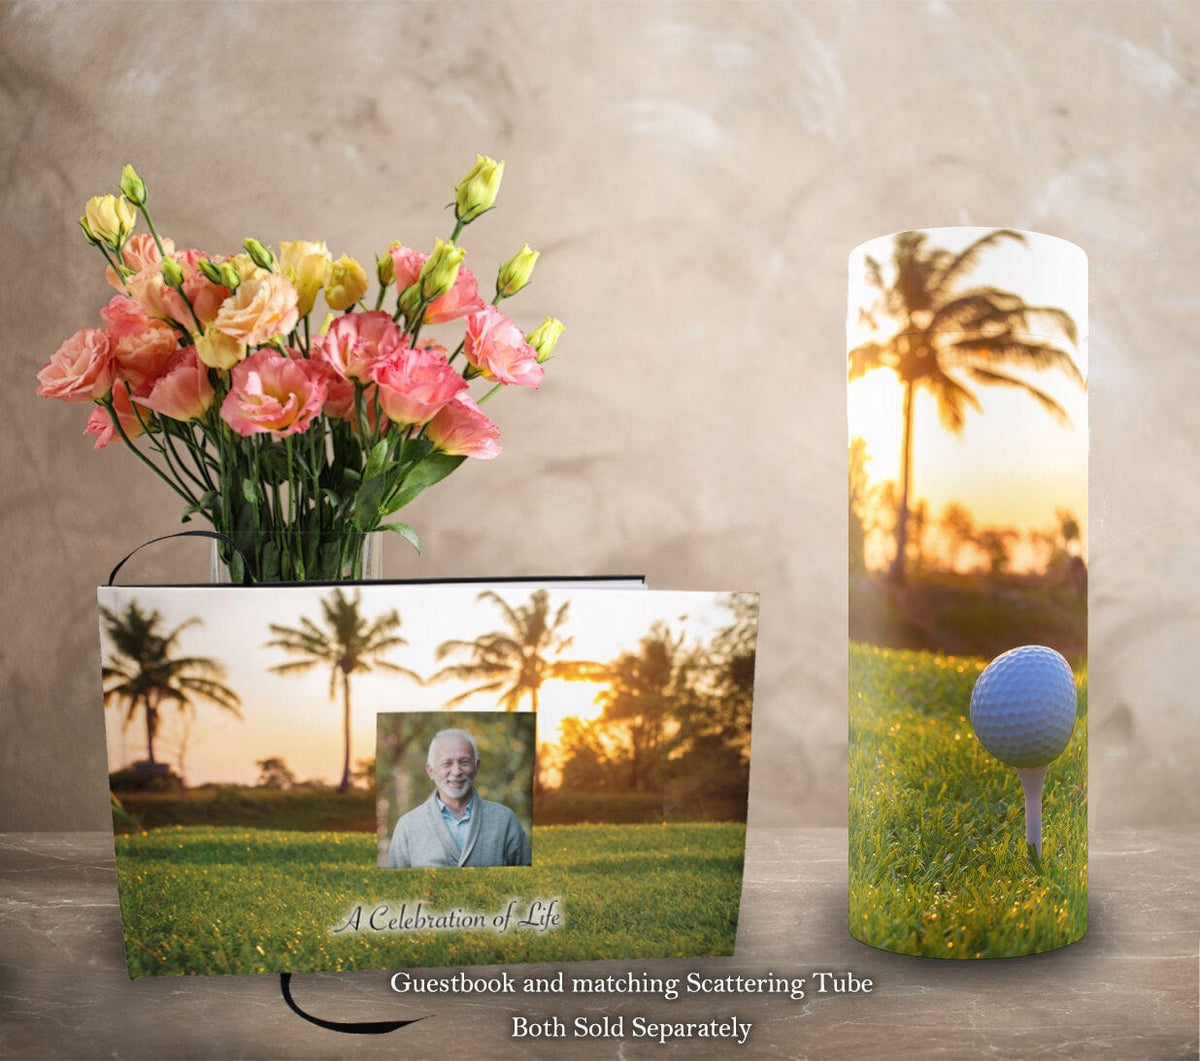 Commemorative Cremation Urns One More Round Golf Matching Themed &#39;Celebration of Life&#39; Guest Book for Funeral or Memorial Service